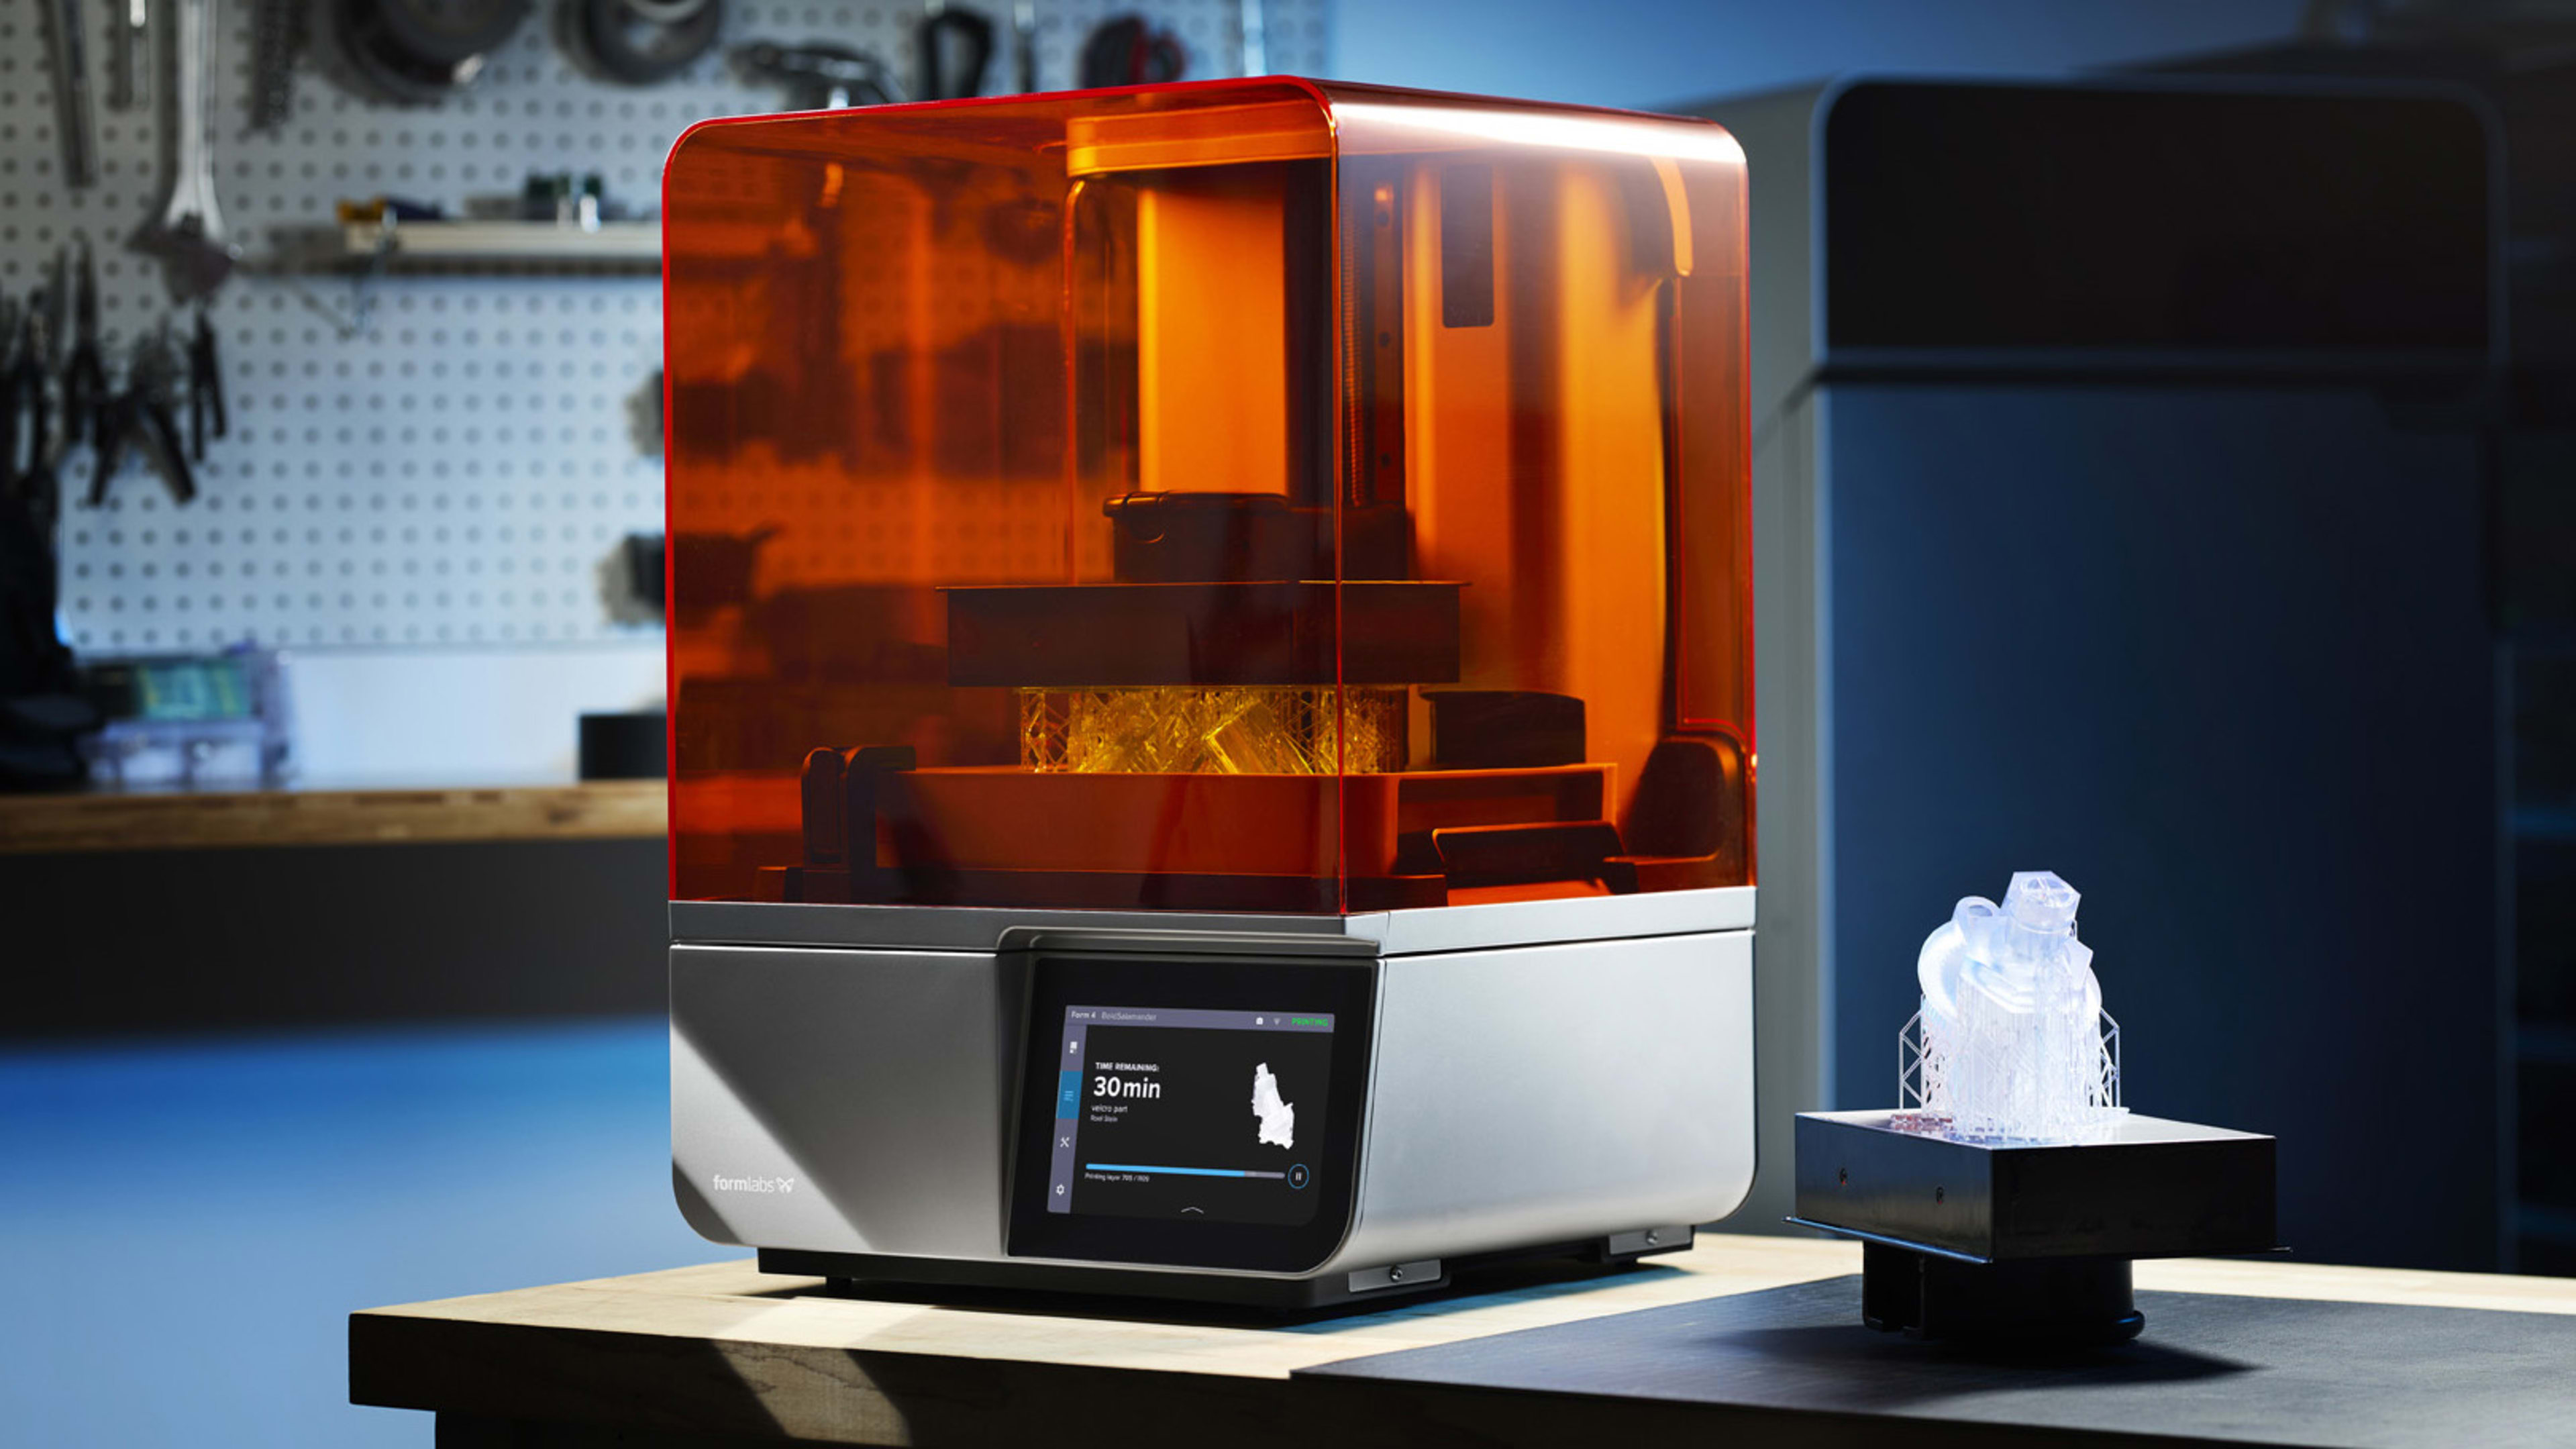 The redesigned 3D printer from Formlabs gets us one step closer to the Enterprise Replicator